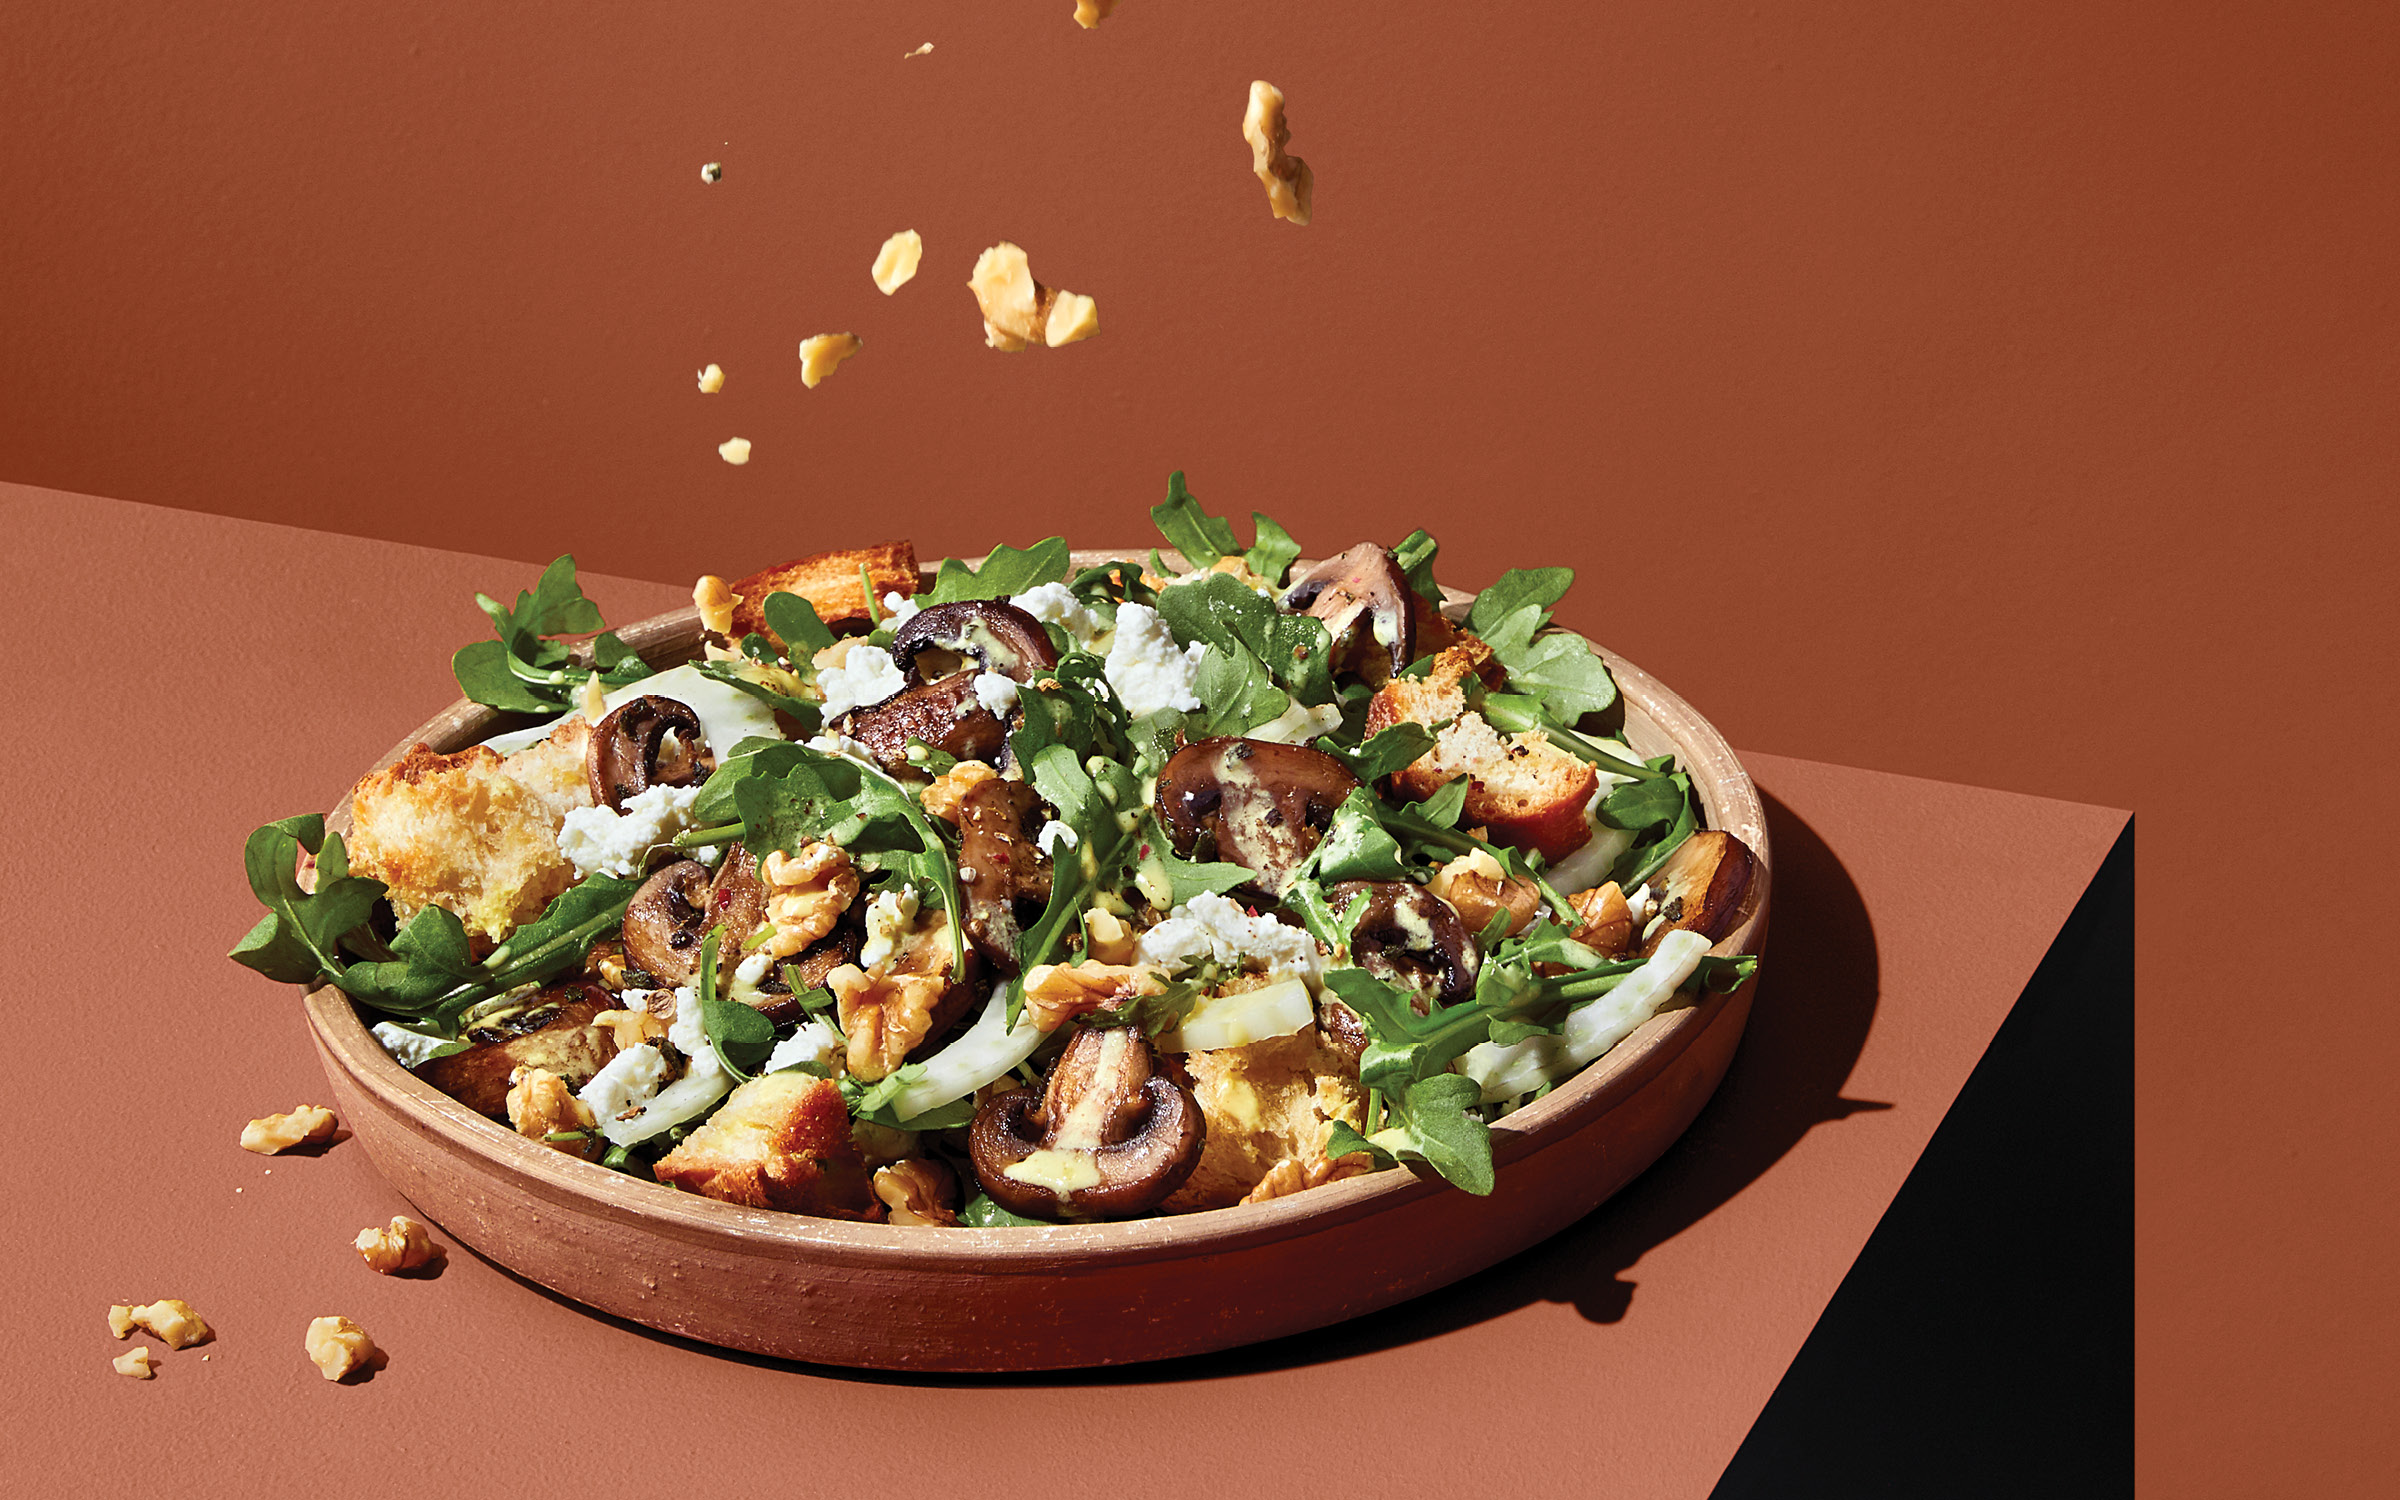 Salad with mushrooms, cheese and nuts in a brown bowl on a brown table.